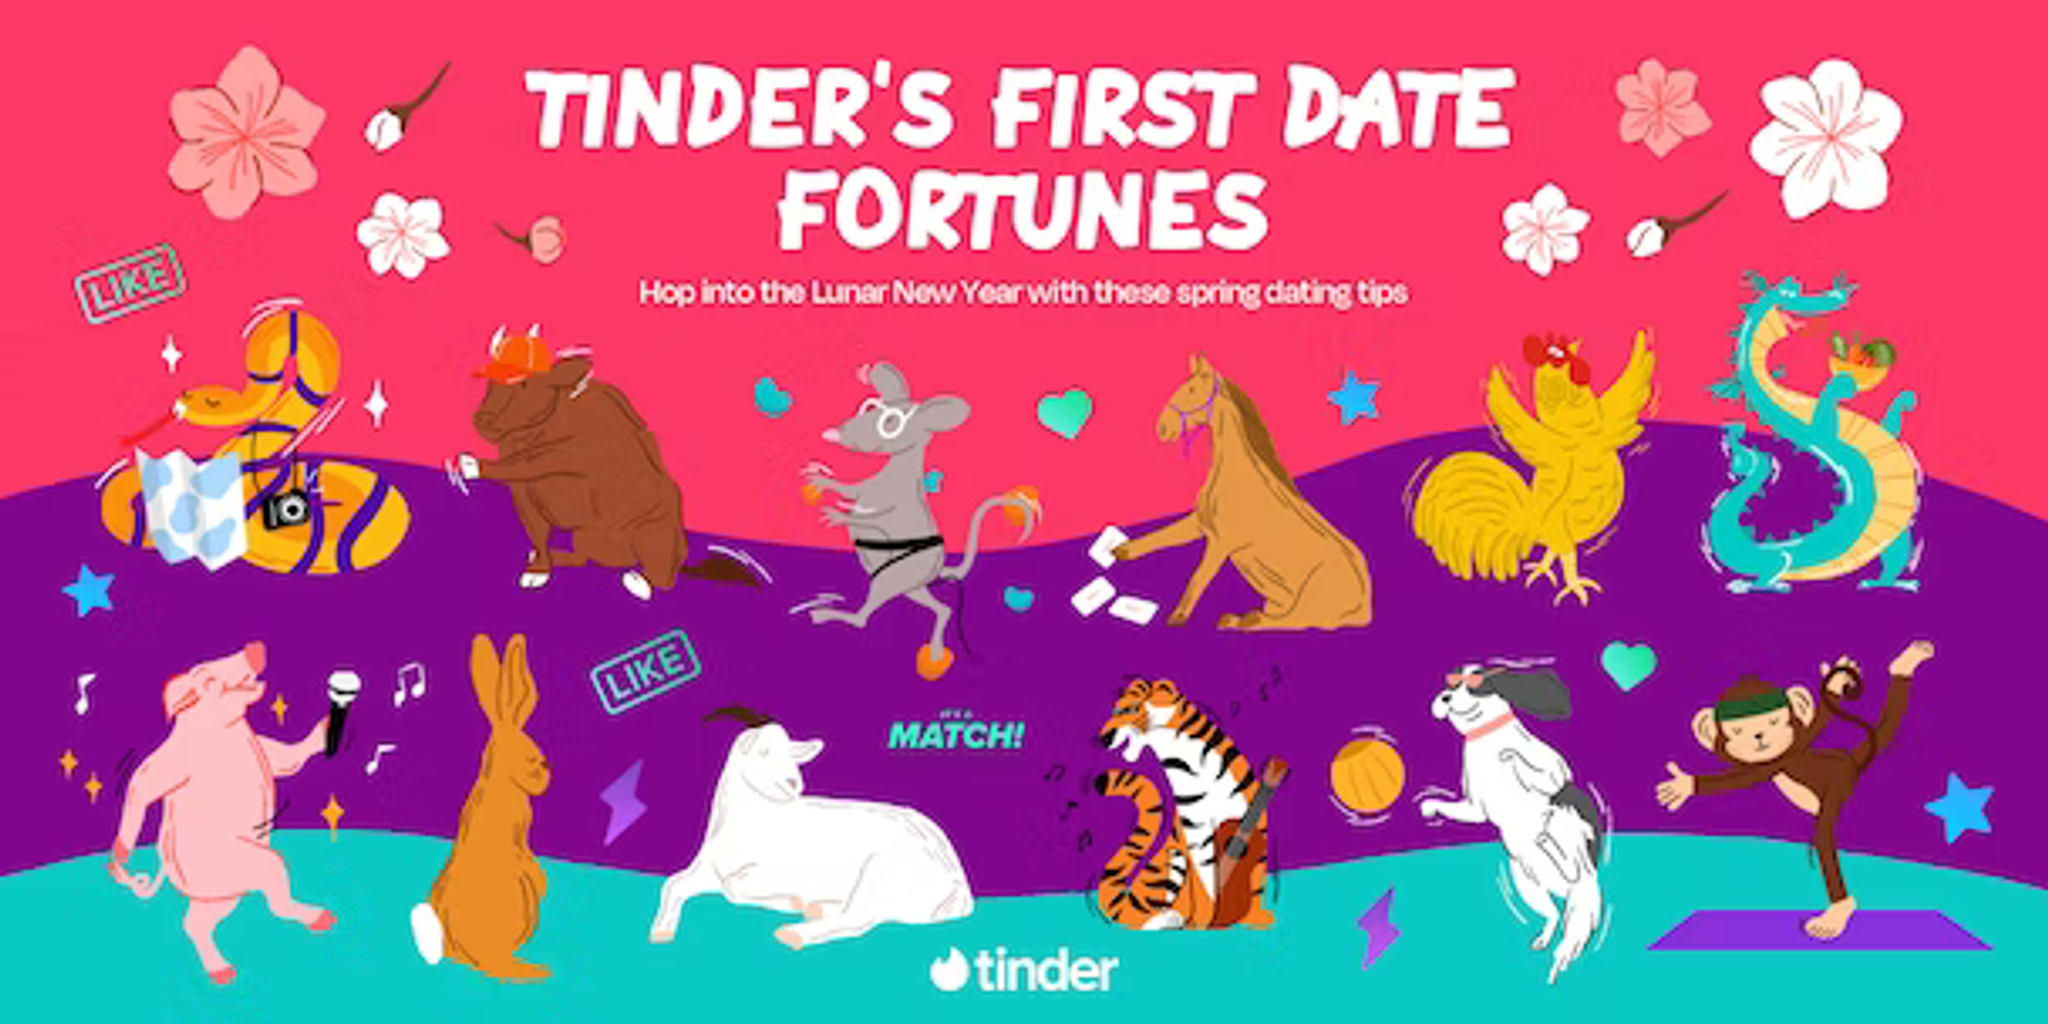 Tinder taps Chinese astrology to guide singletons